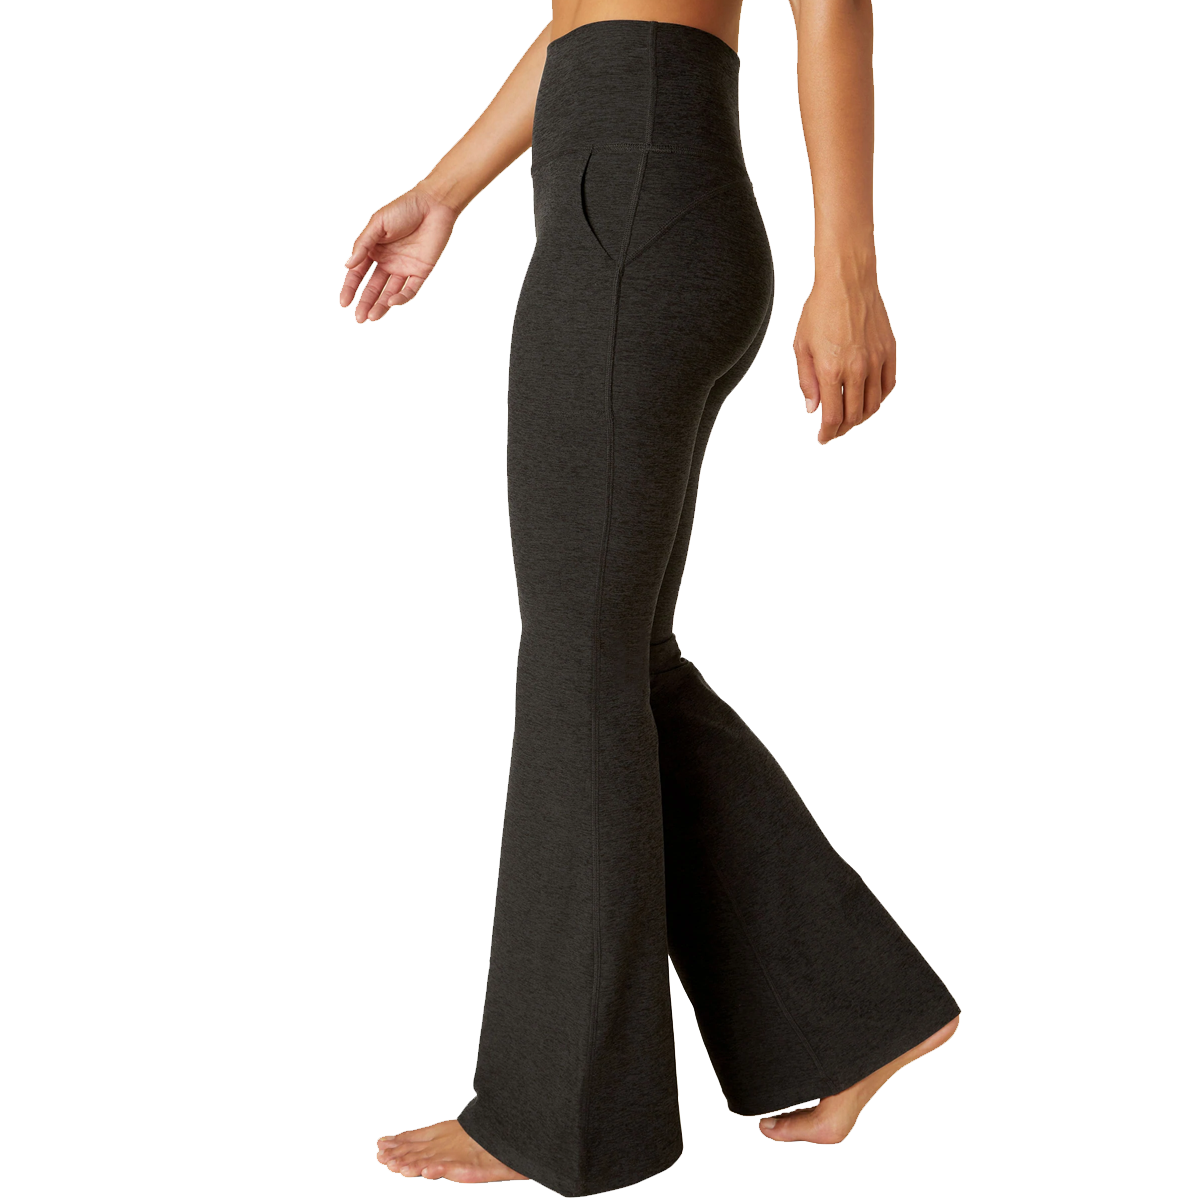 Women's Spacedye High Waist All Day Flare Pant alternate view